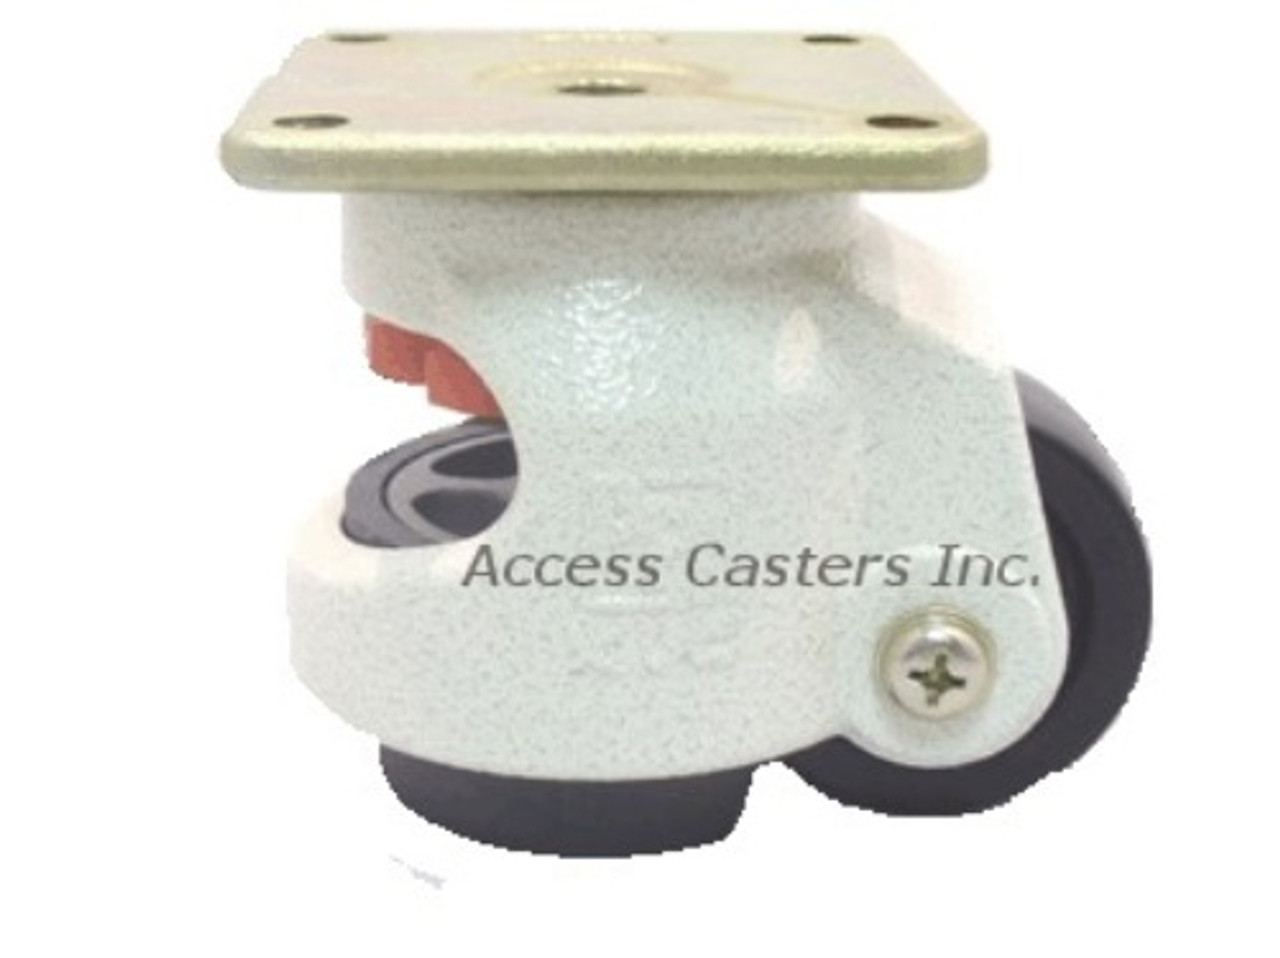 2 1/2 inch Leveling Caster Square Top Plate